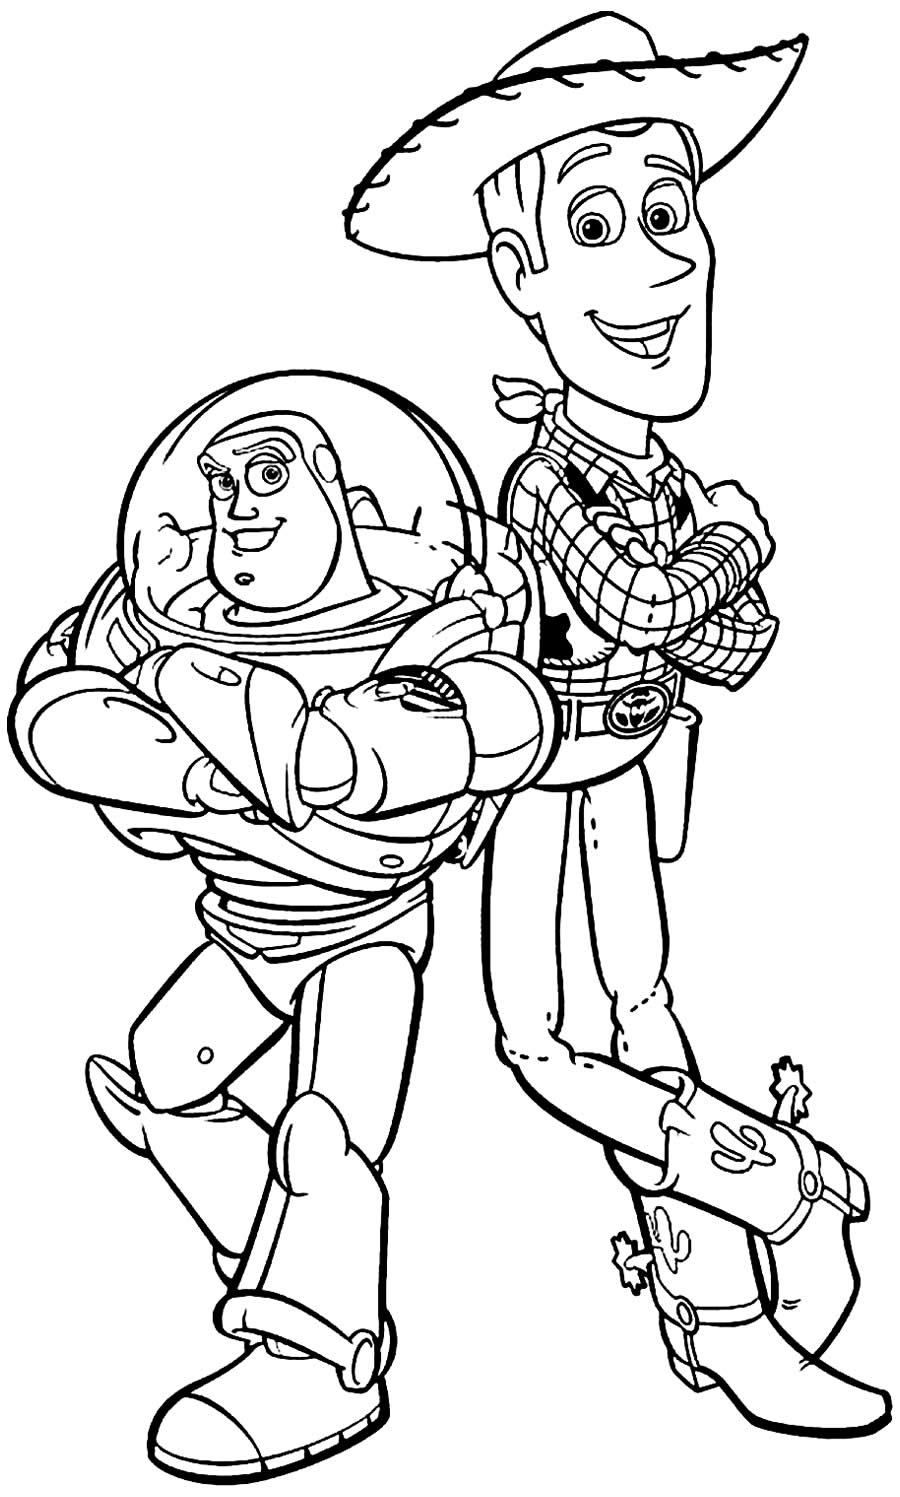 Toy Story Images A Colorier